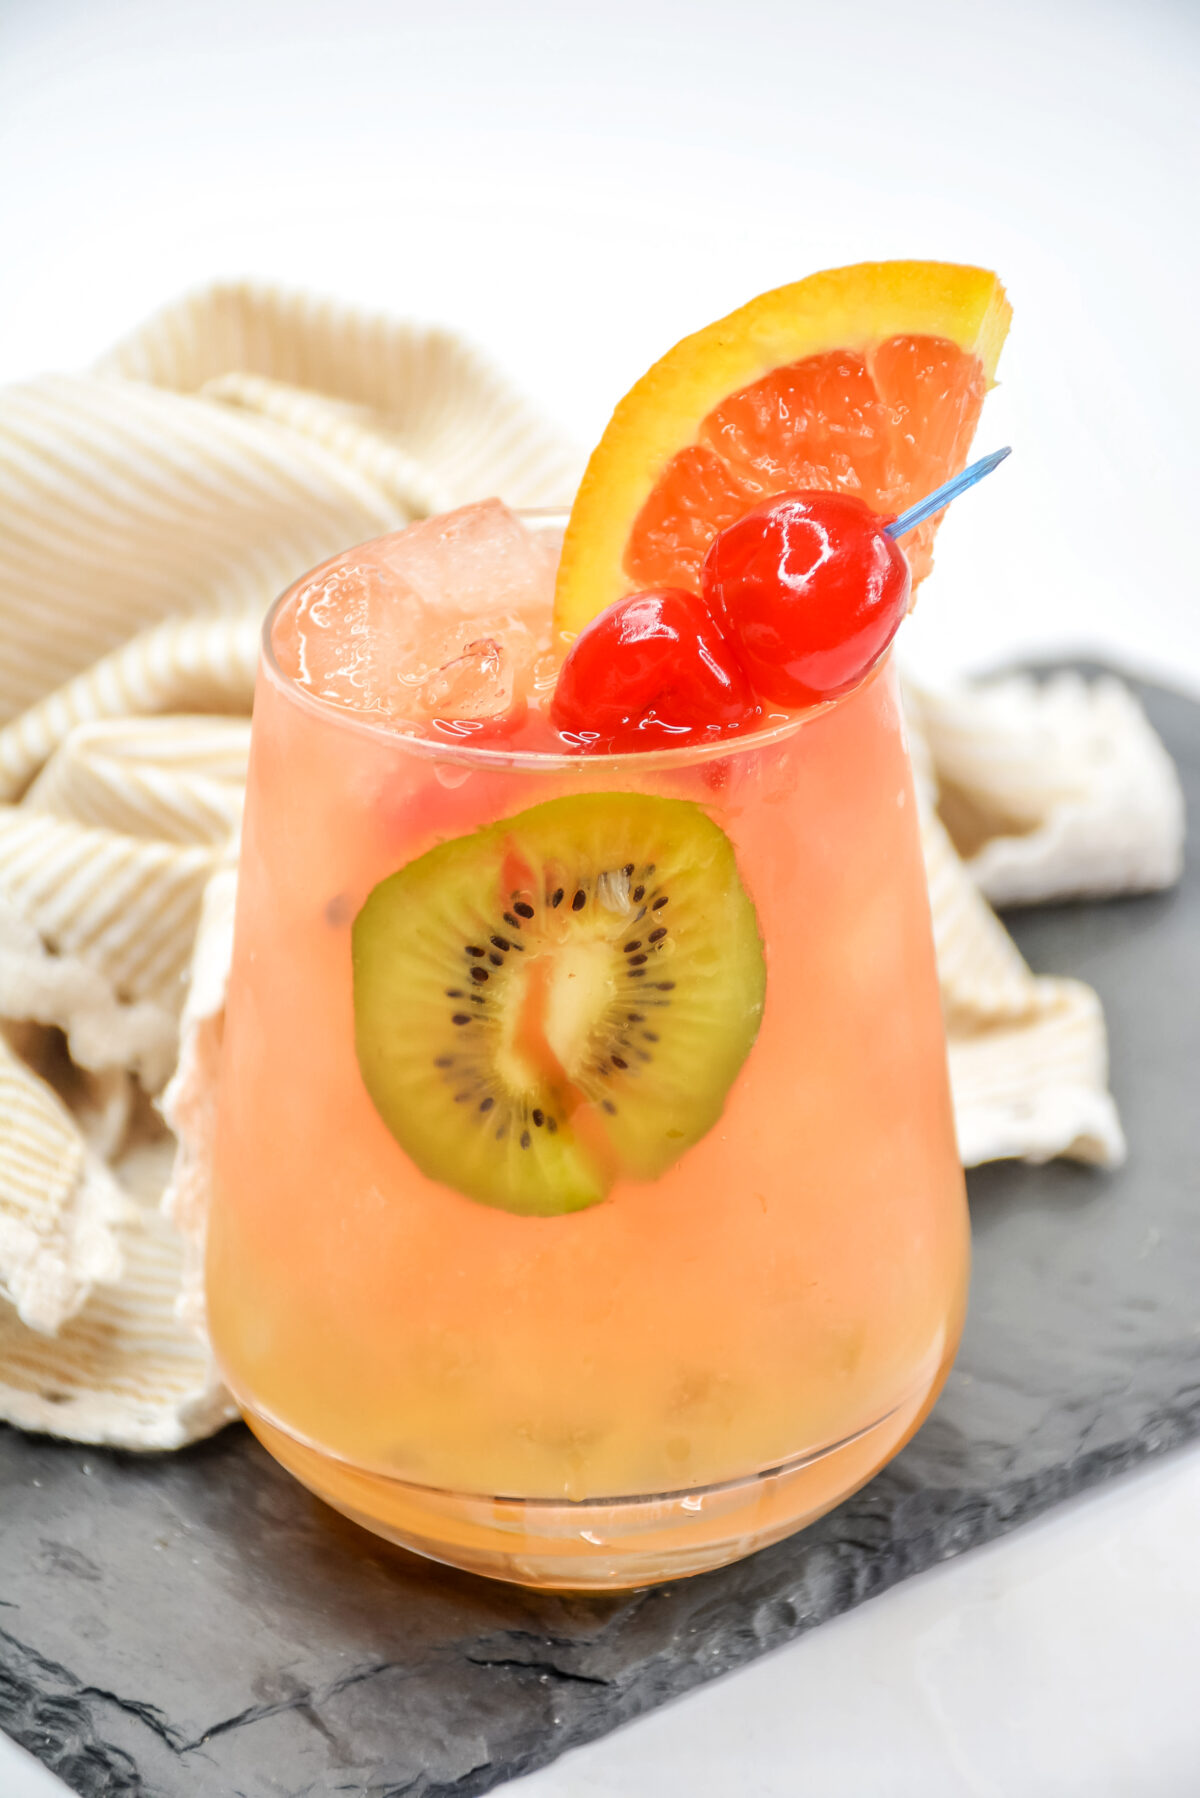 A delicious tropical rum punch recipe made with a blend of 3 rums, orange liquor, and tropical fruit juice; it's perfect for your next party!